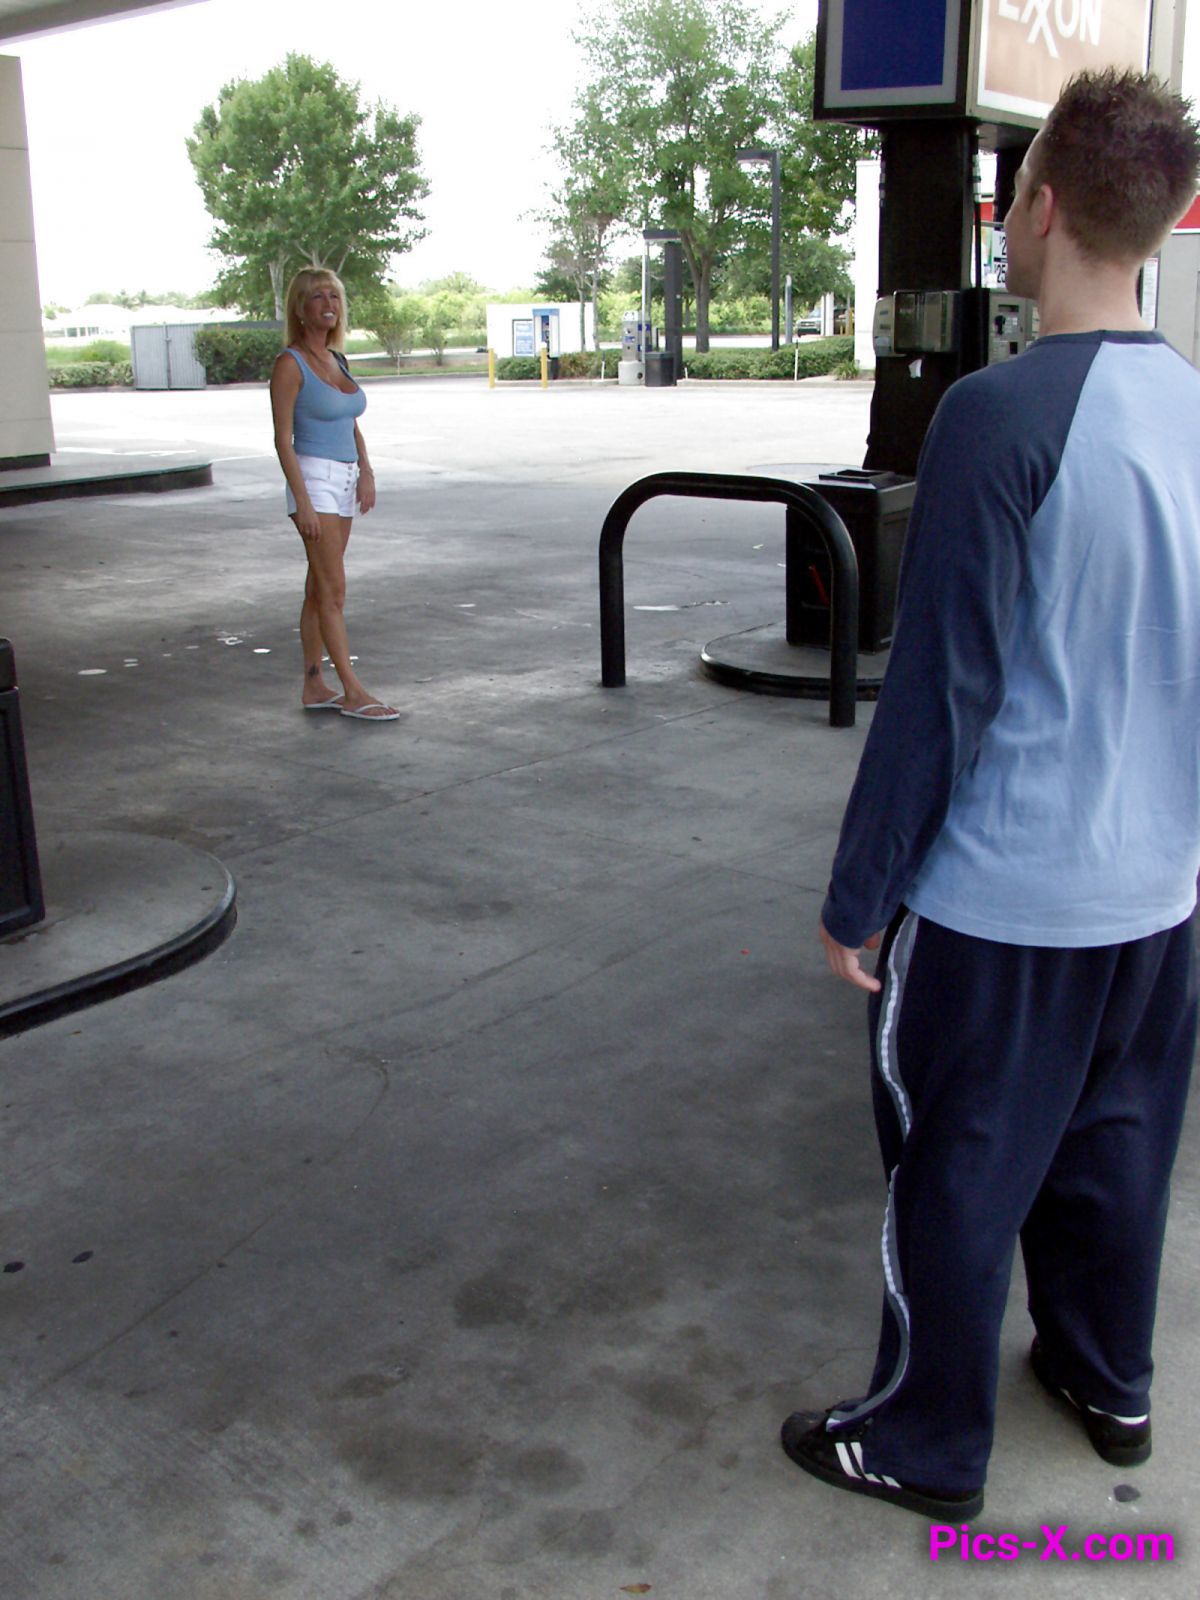 MILF Pumping Gas Gets Pumped Herself - Milf Search - Image 18